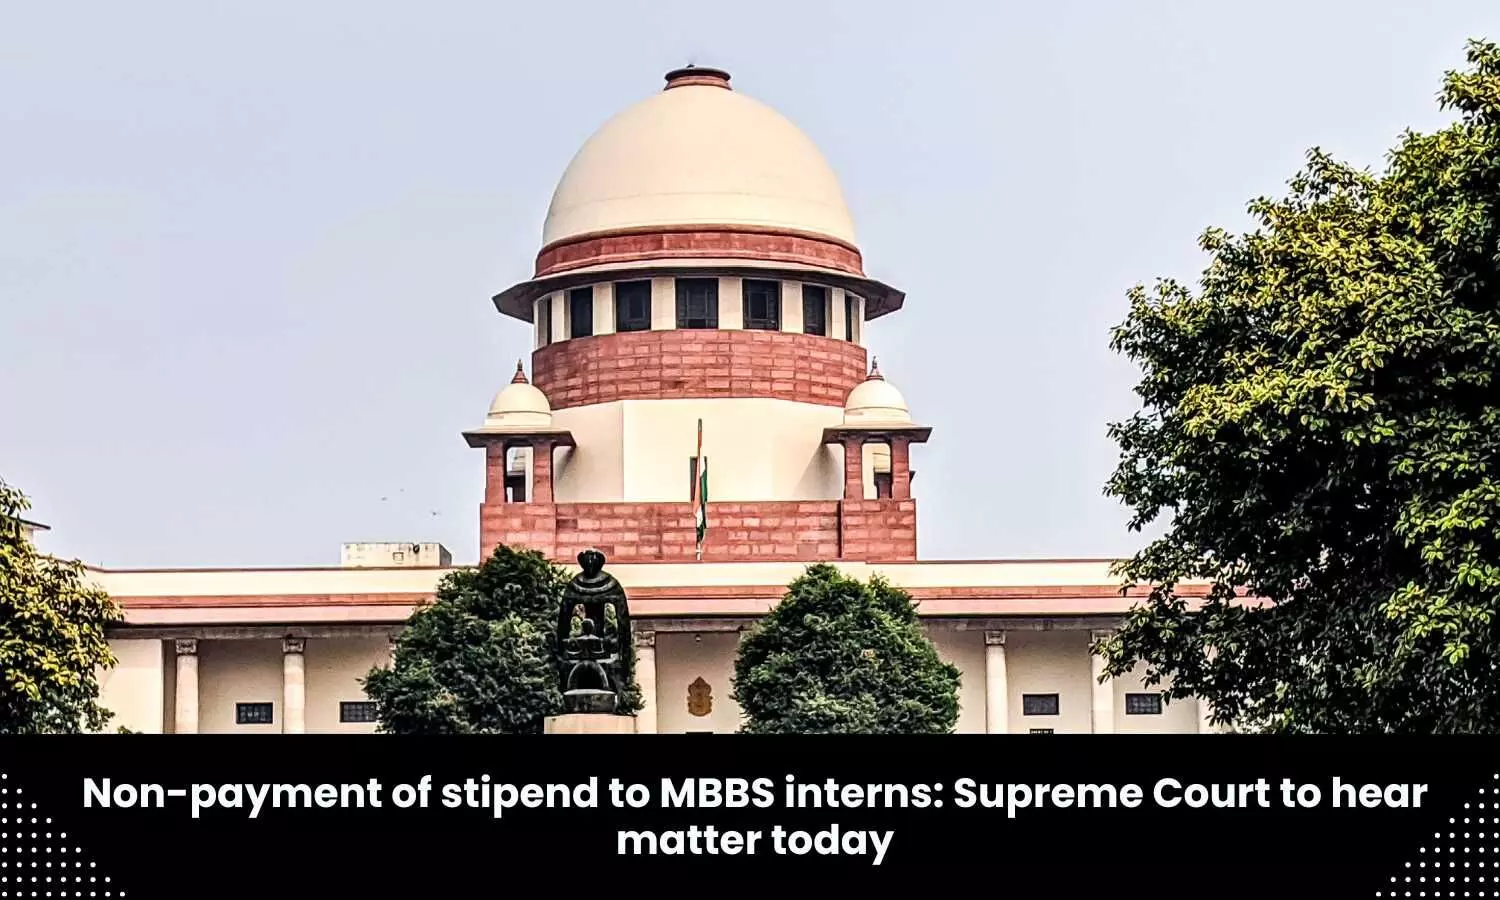 Issue of non-payment of stipends to MBBS interns to be considered by SC